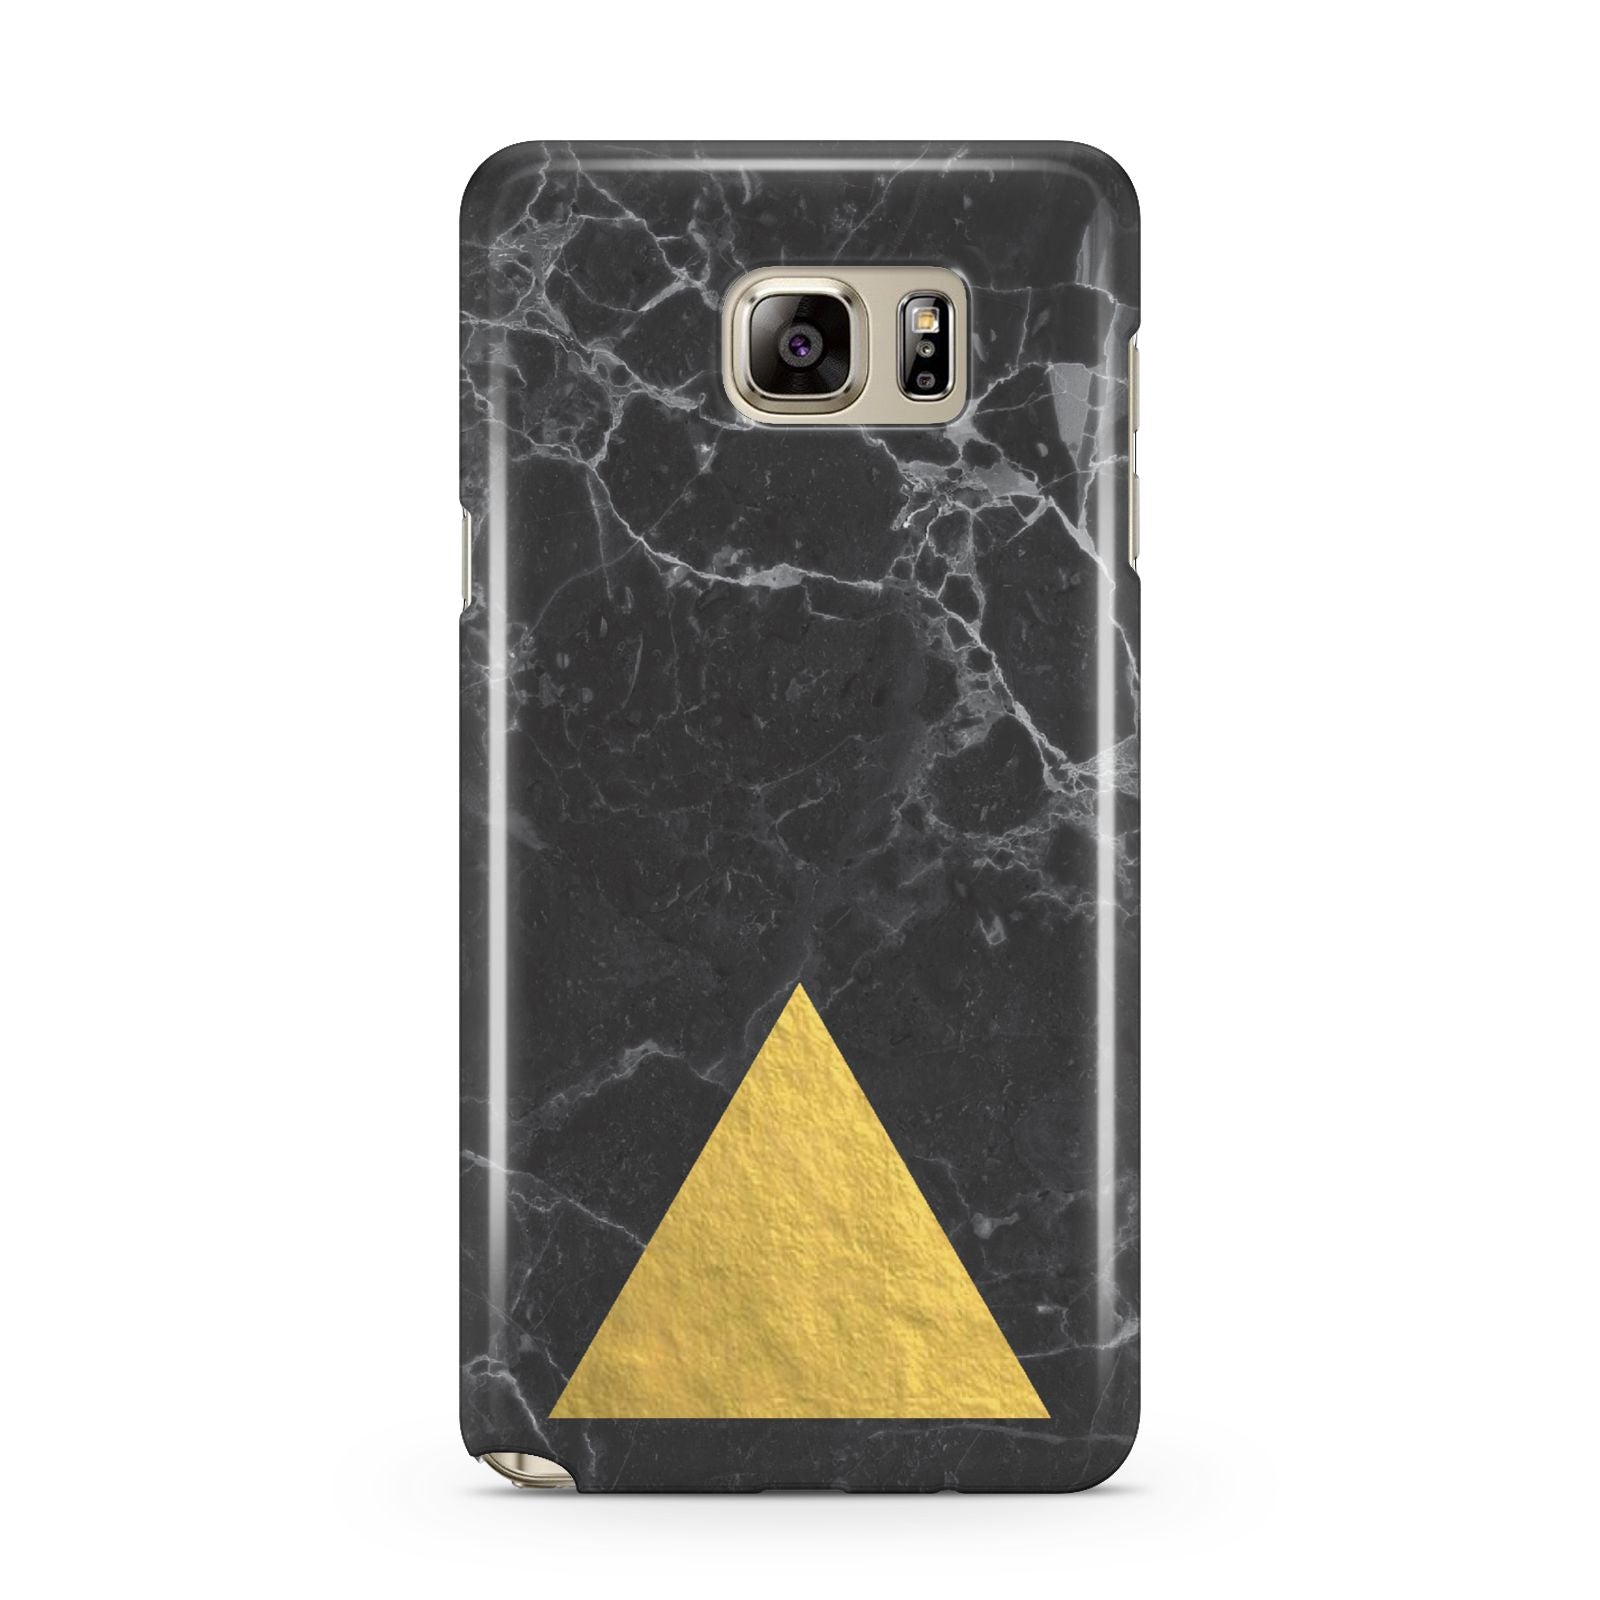 Marble Black Gold Foil Samsung Galaxy Note 5 Case